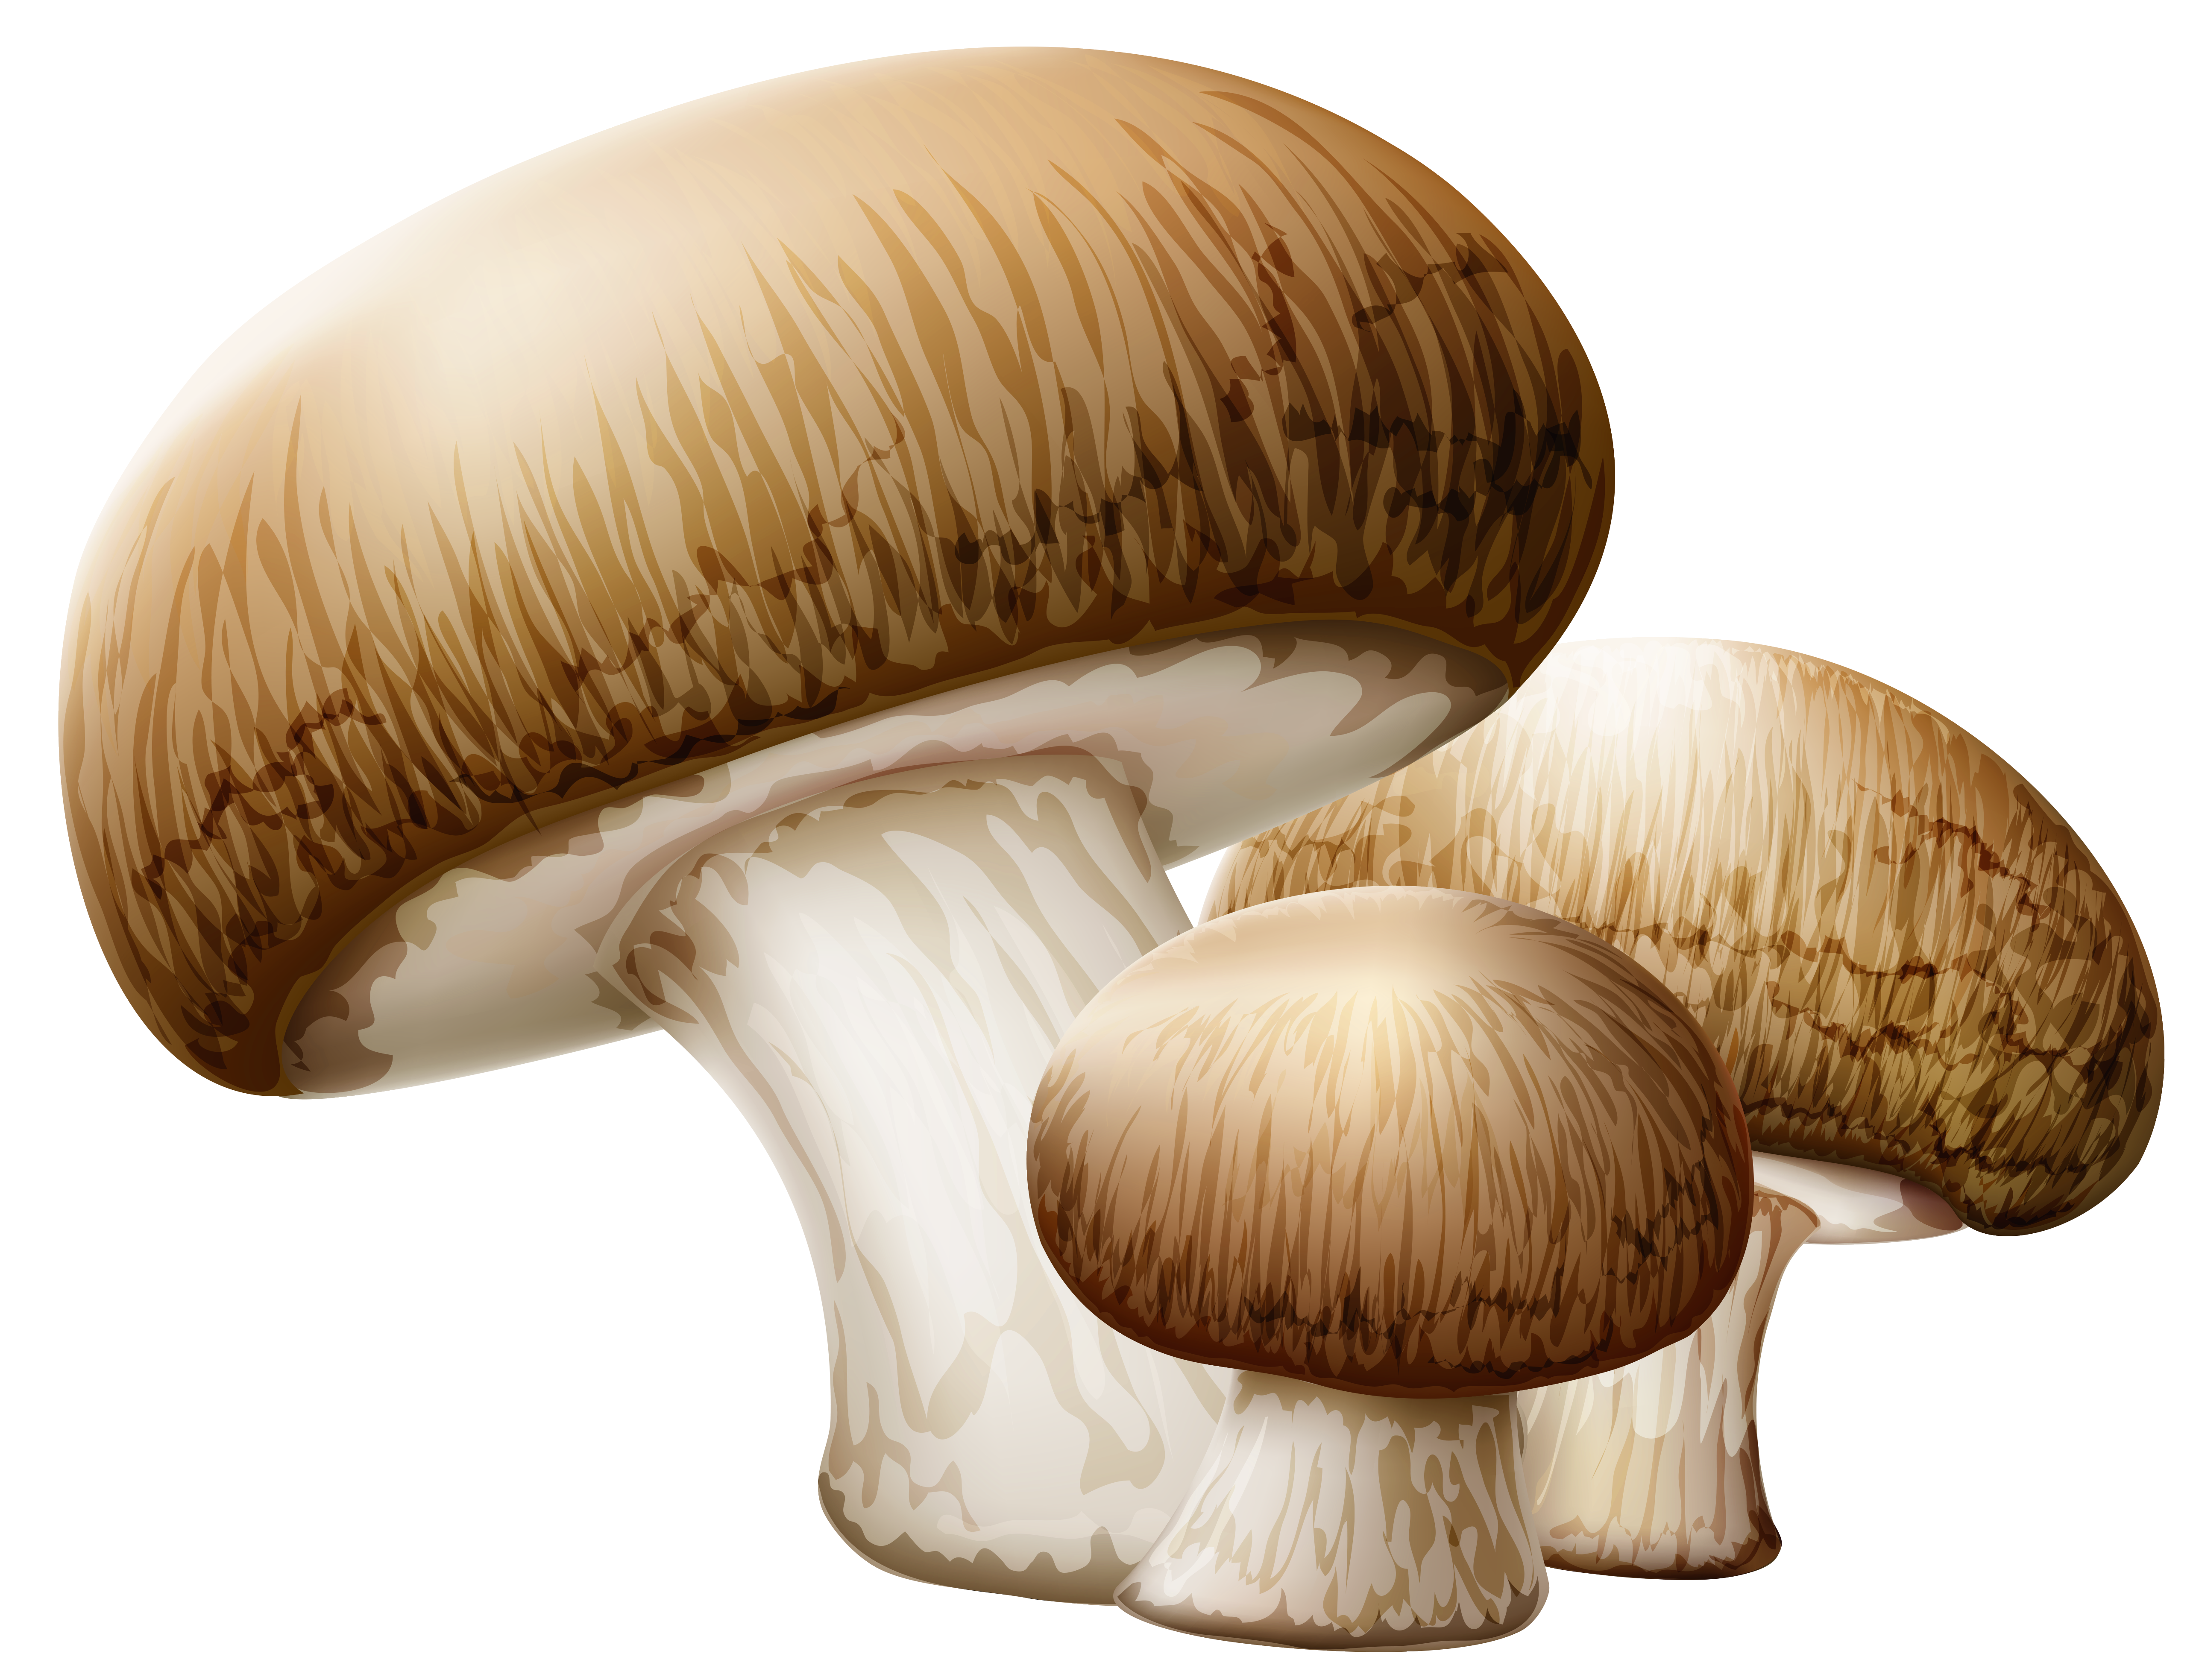 Mushroom Png by Moonglowlilly